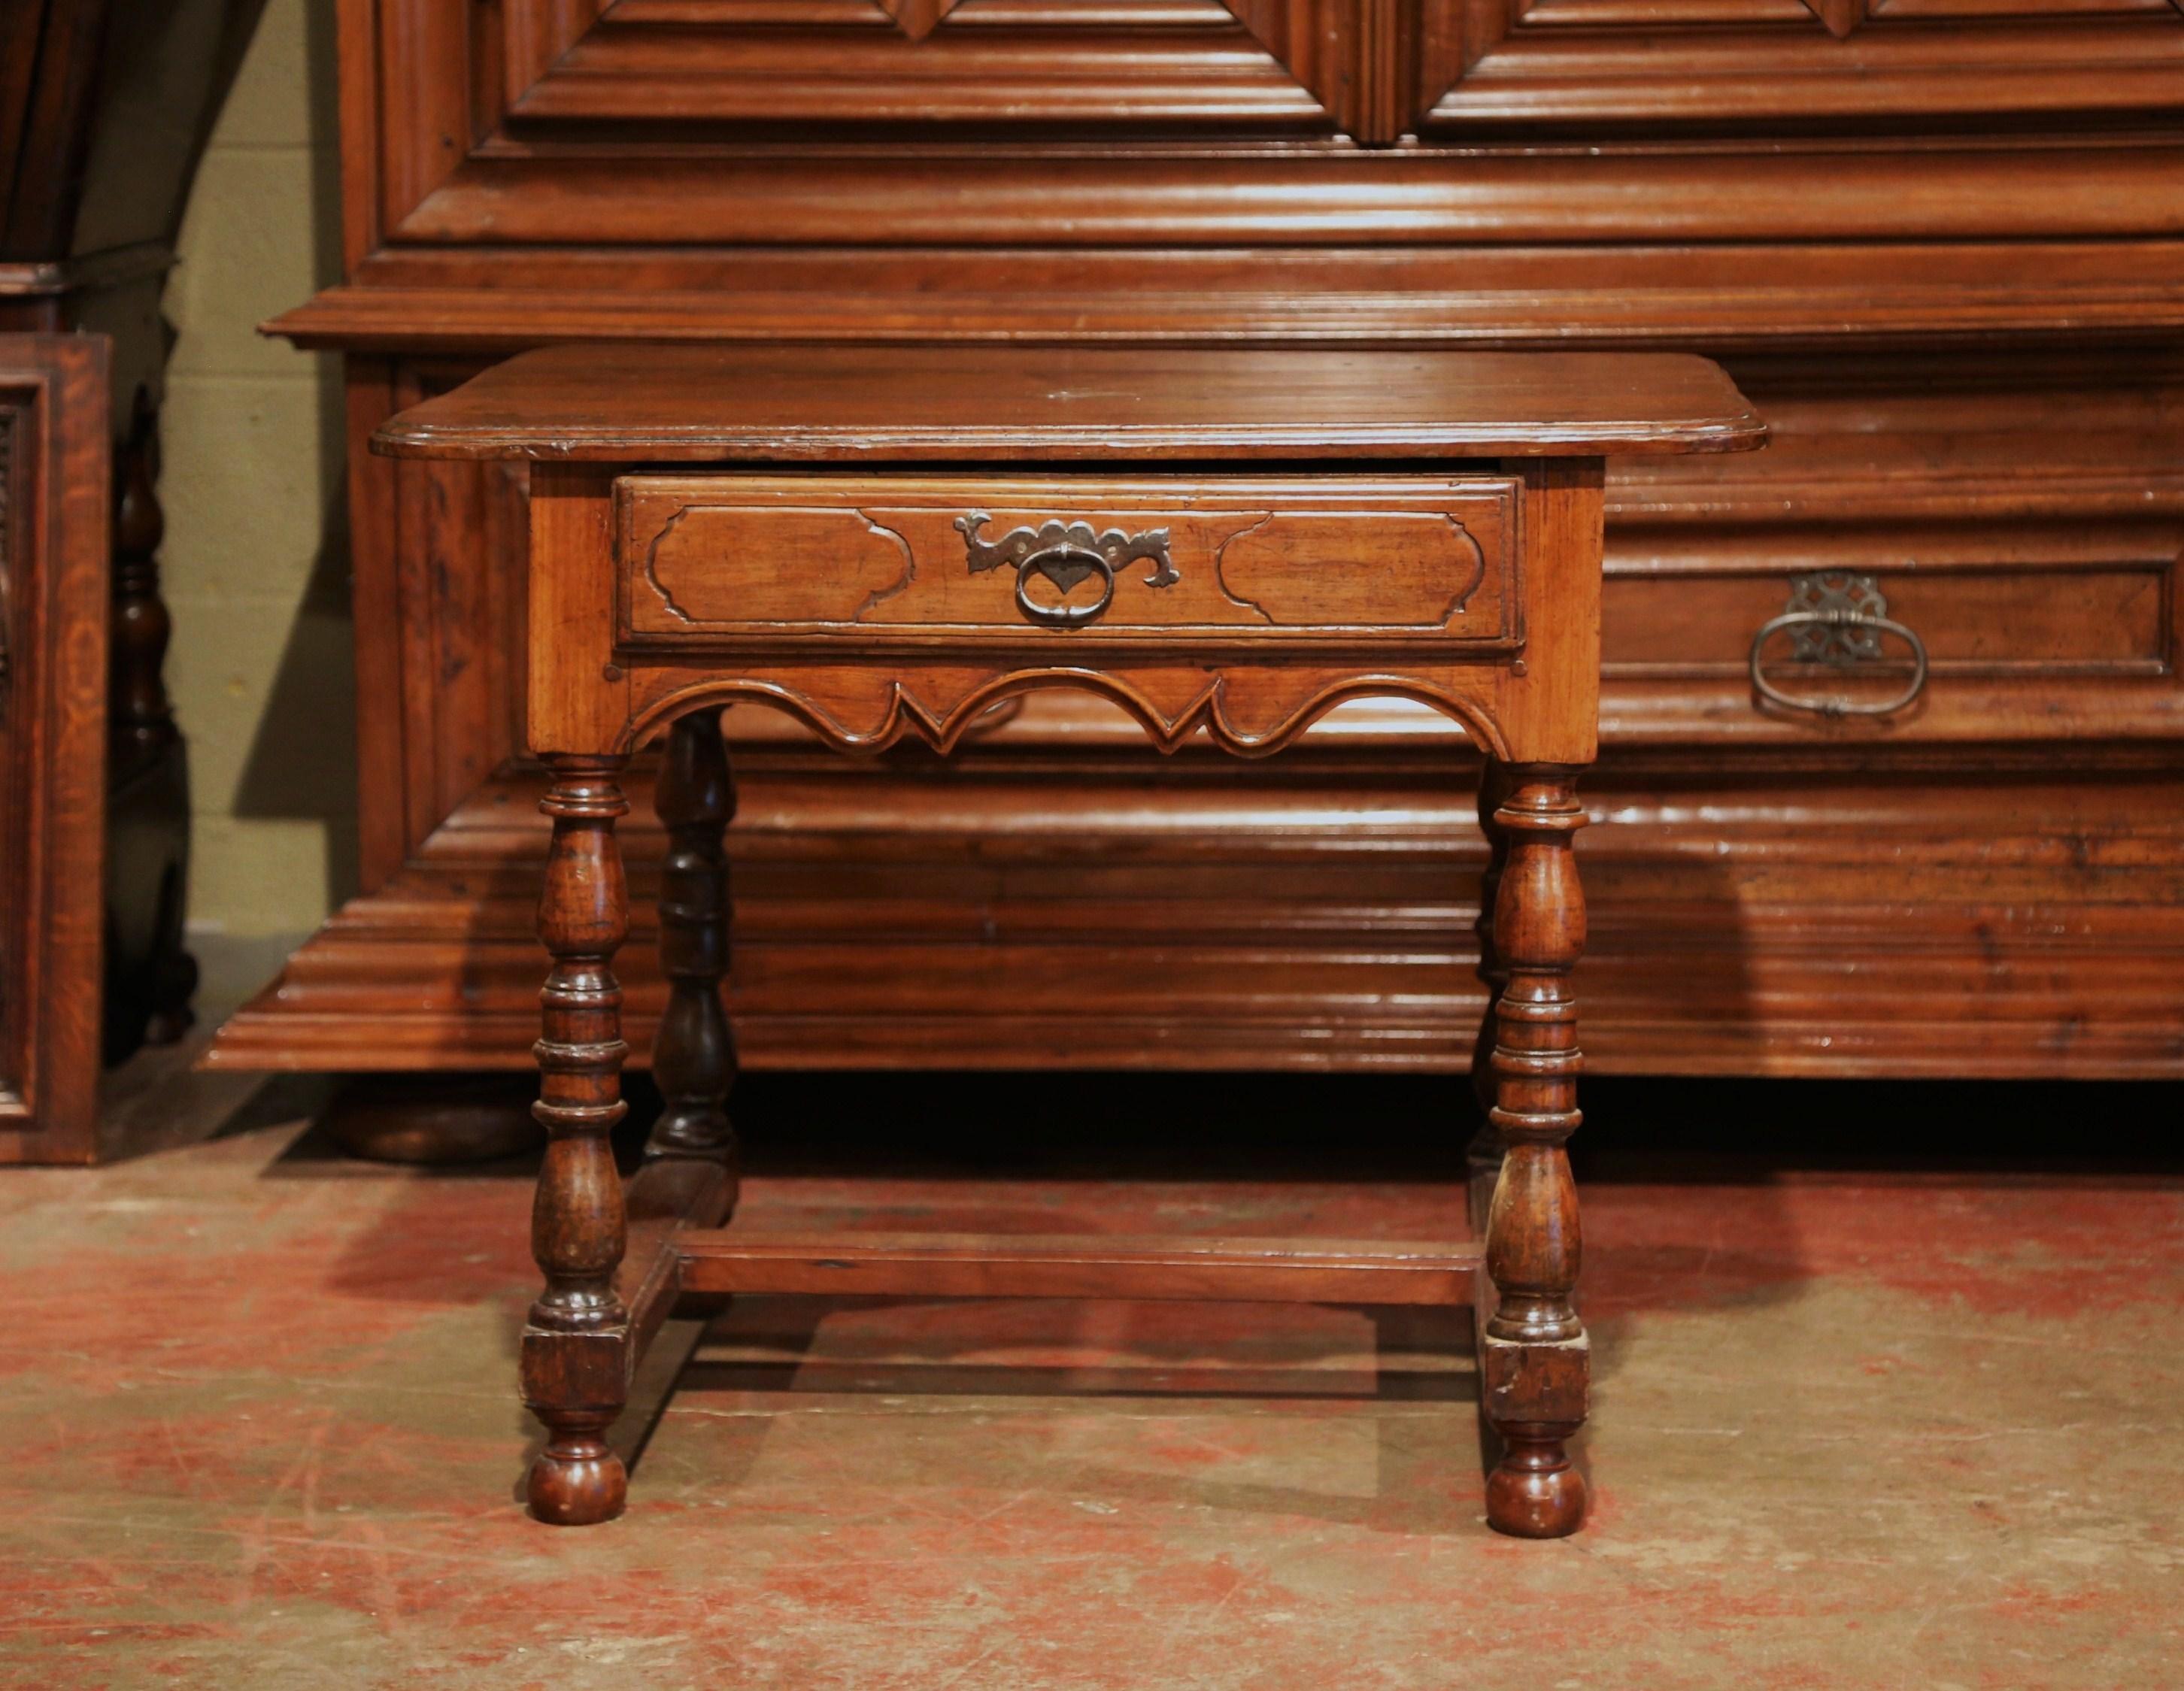 Incorporate extra, functional surface space into your living room with this elegant fruitwood end table. Crafted in the Perigord region of France, circa 1760, the side table features a single drawer across the front embellished with the original